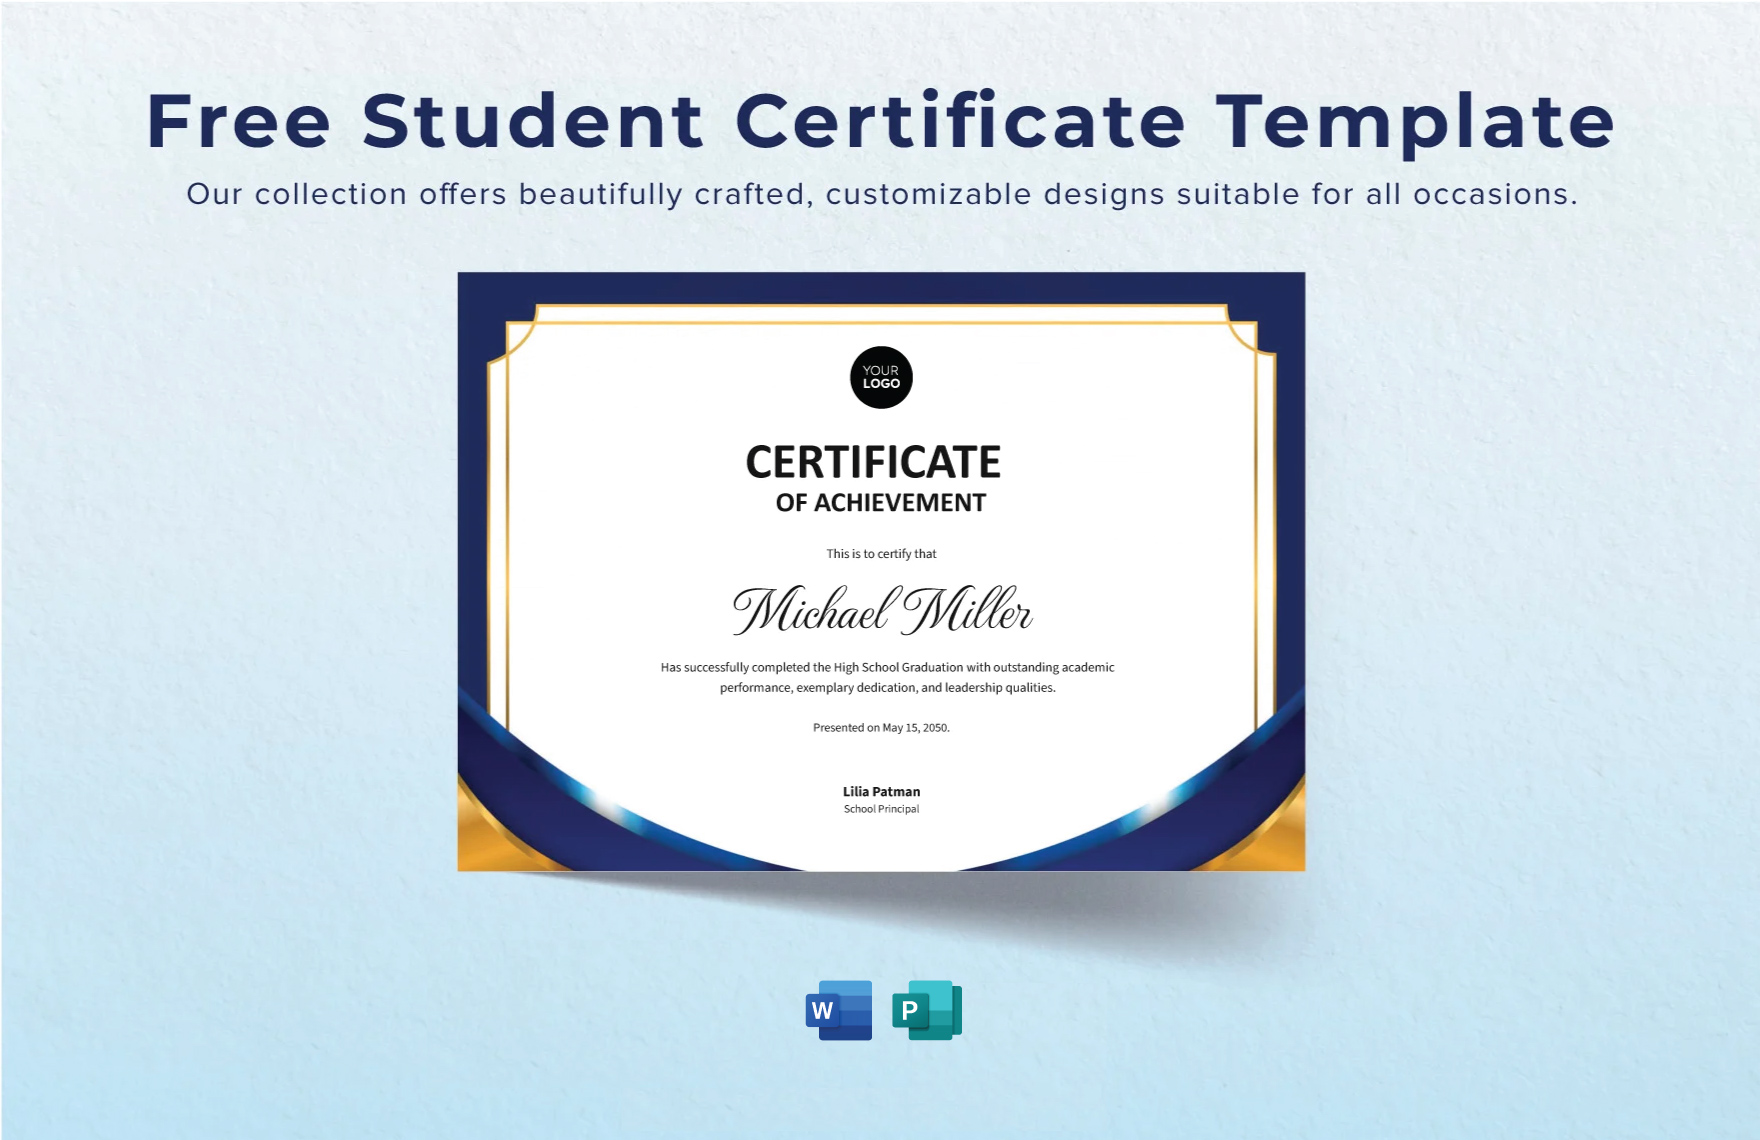 Free Student Certificate Template